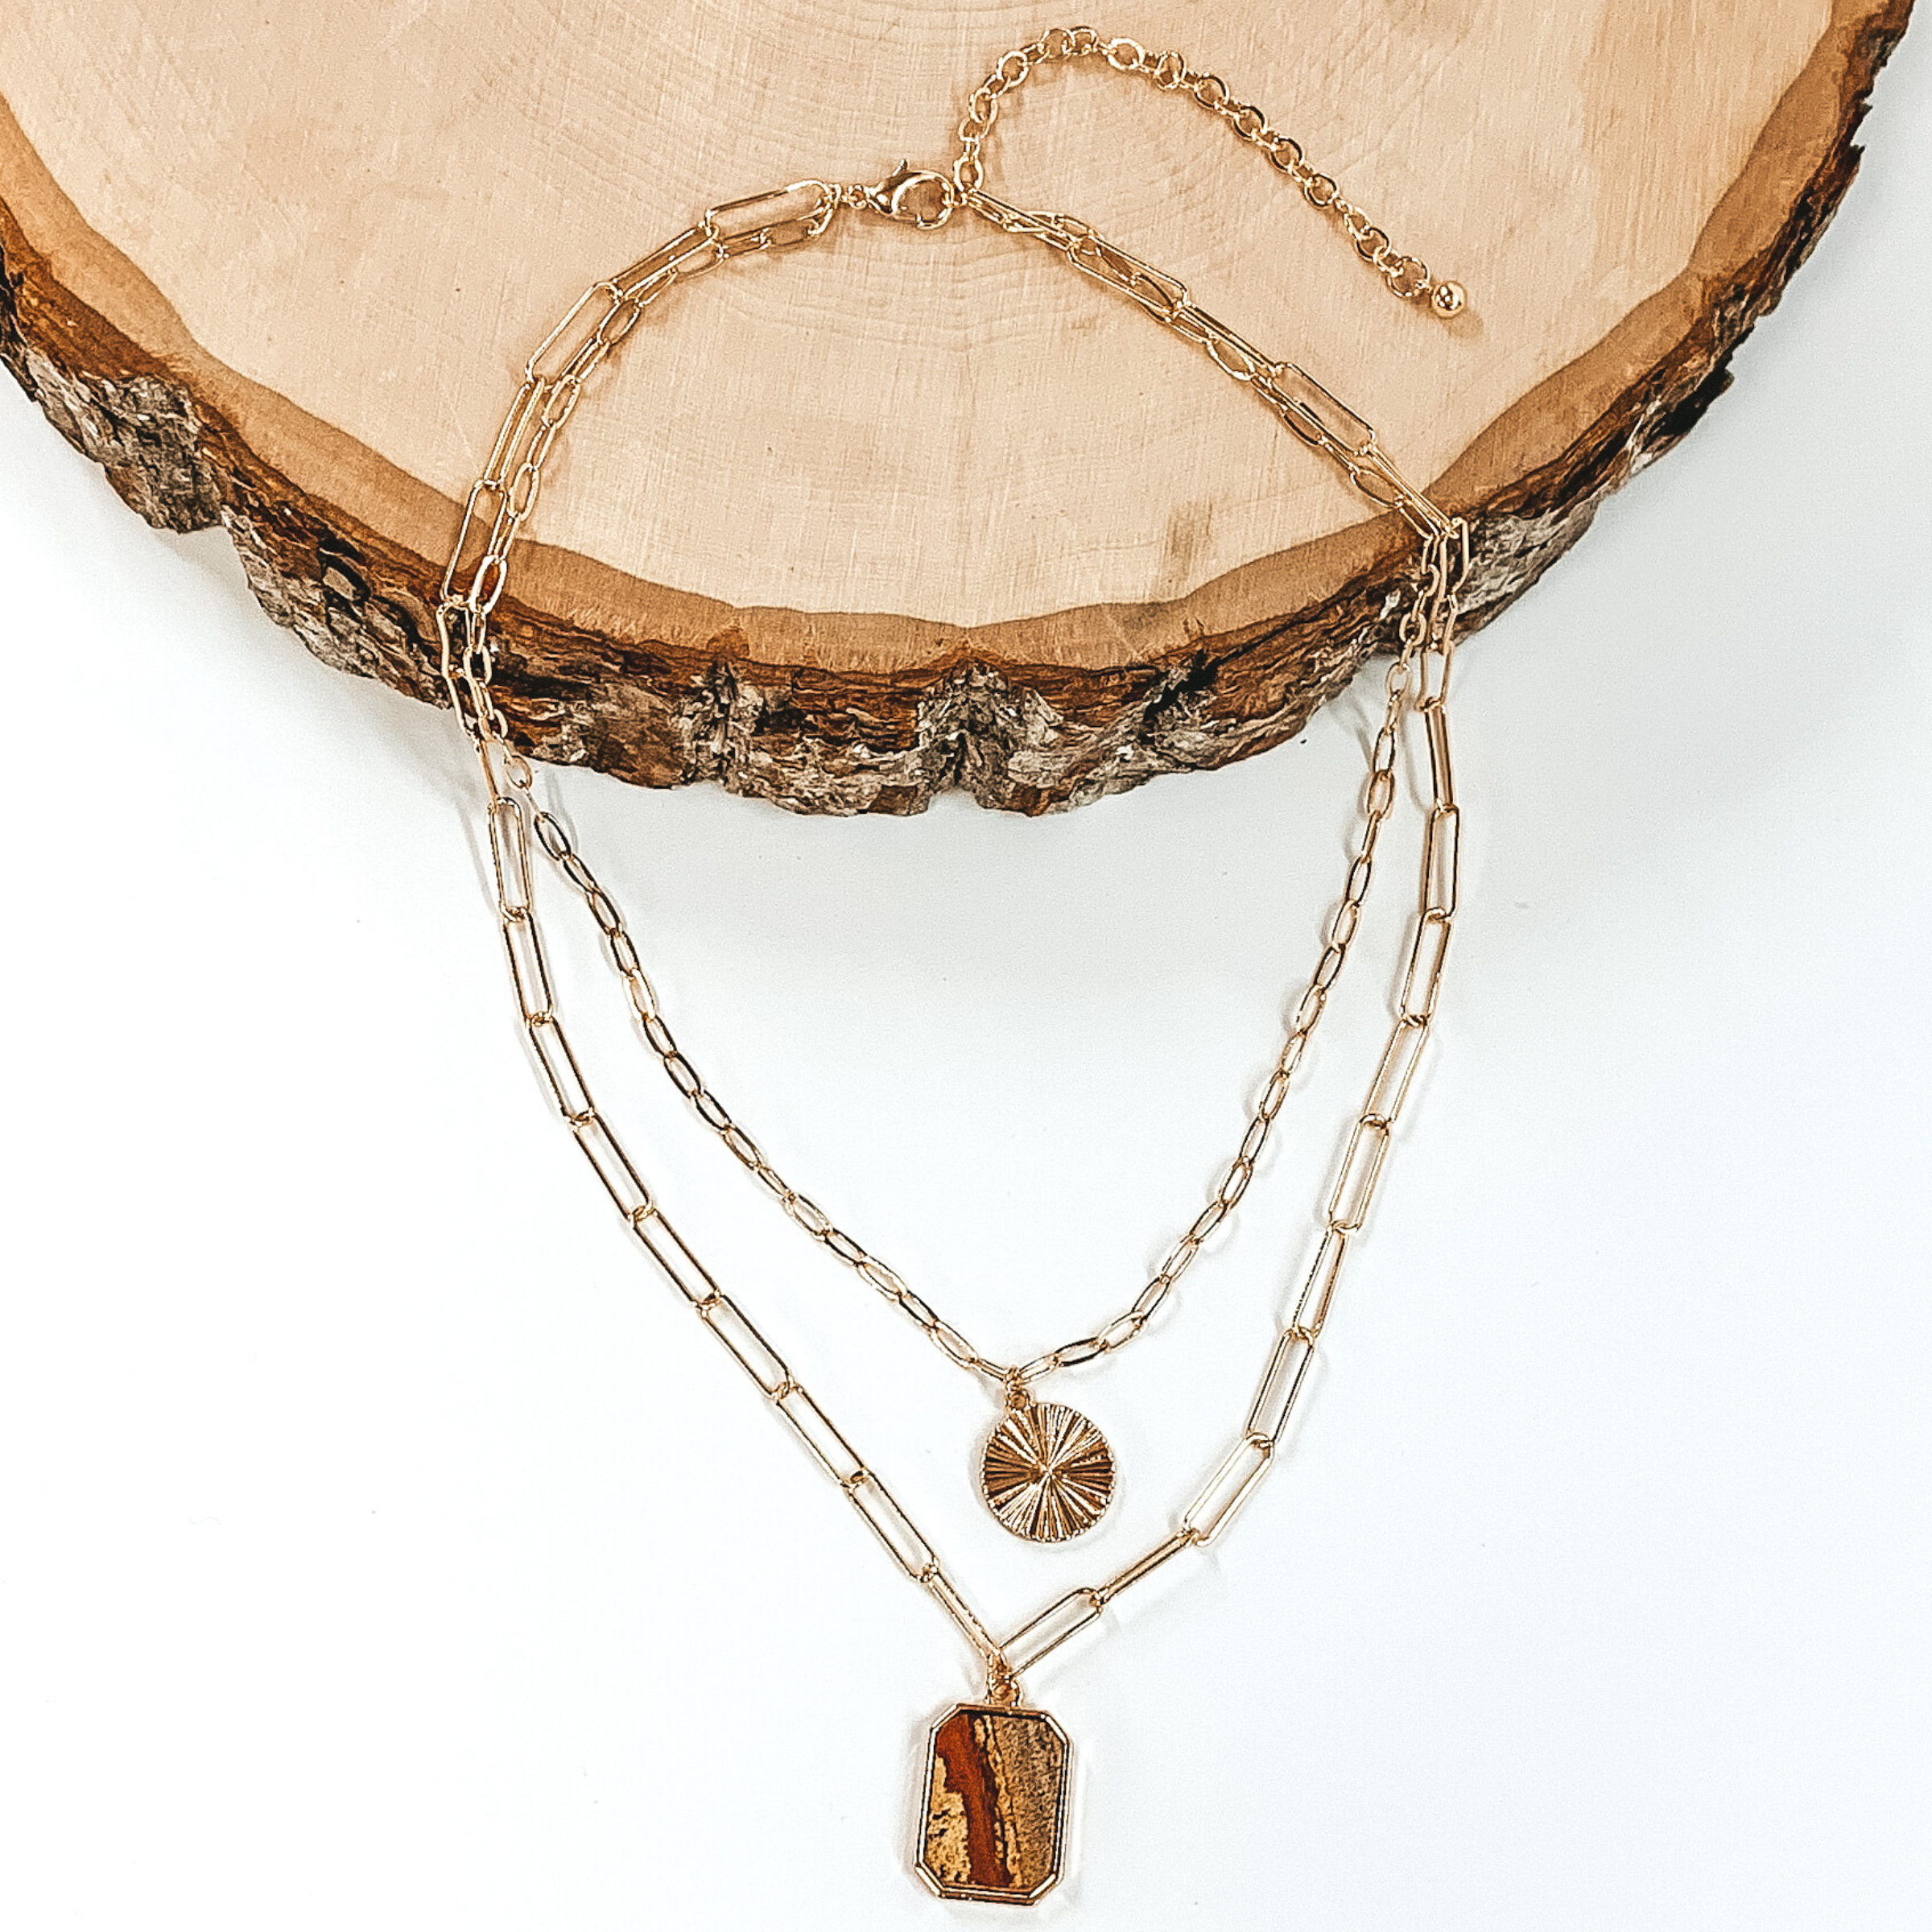 Double layered paperclip chain necklace in gold. The shorter strand has a gold circle pendant and the longer strand has a tan stone pendant in a long octagon shape. This necklace is half laying on a piece of wood and is pictured on a white background.